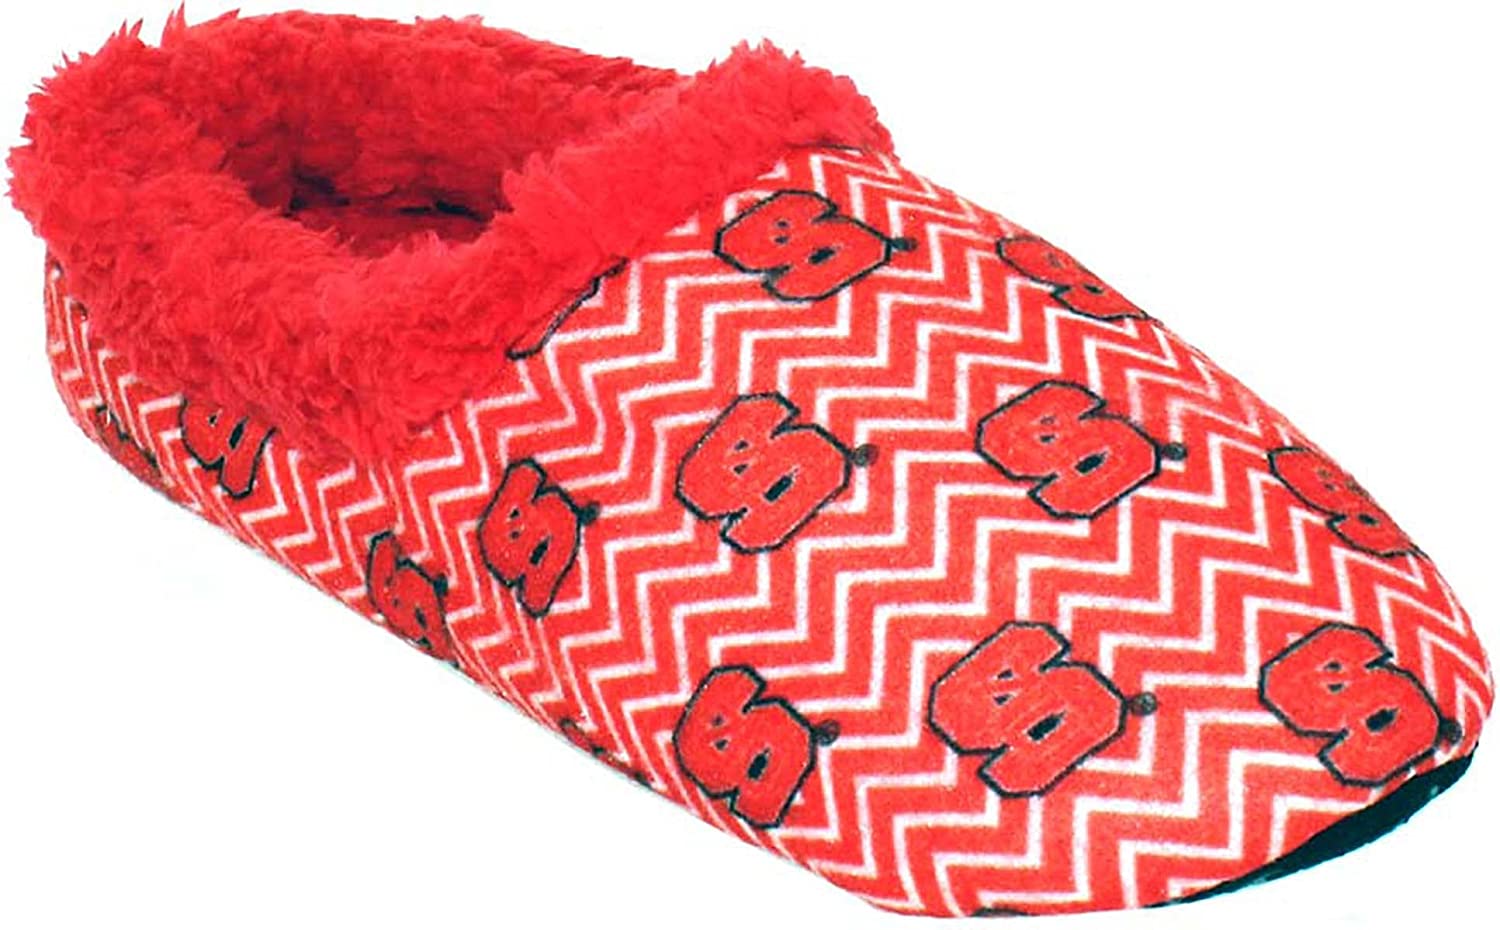 Comfy Feet Everything Comfy NC State Wolfpack Chevron Slip On Slipper LG - image 3 of 5